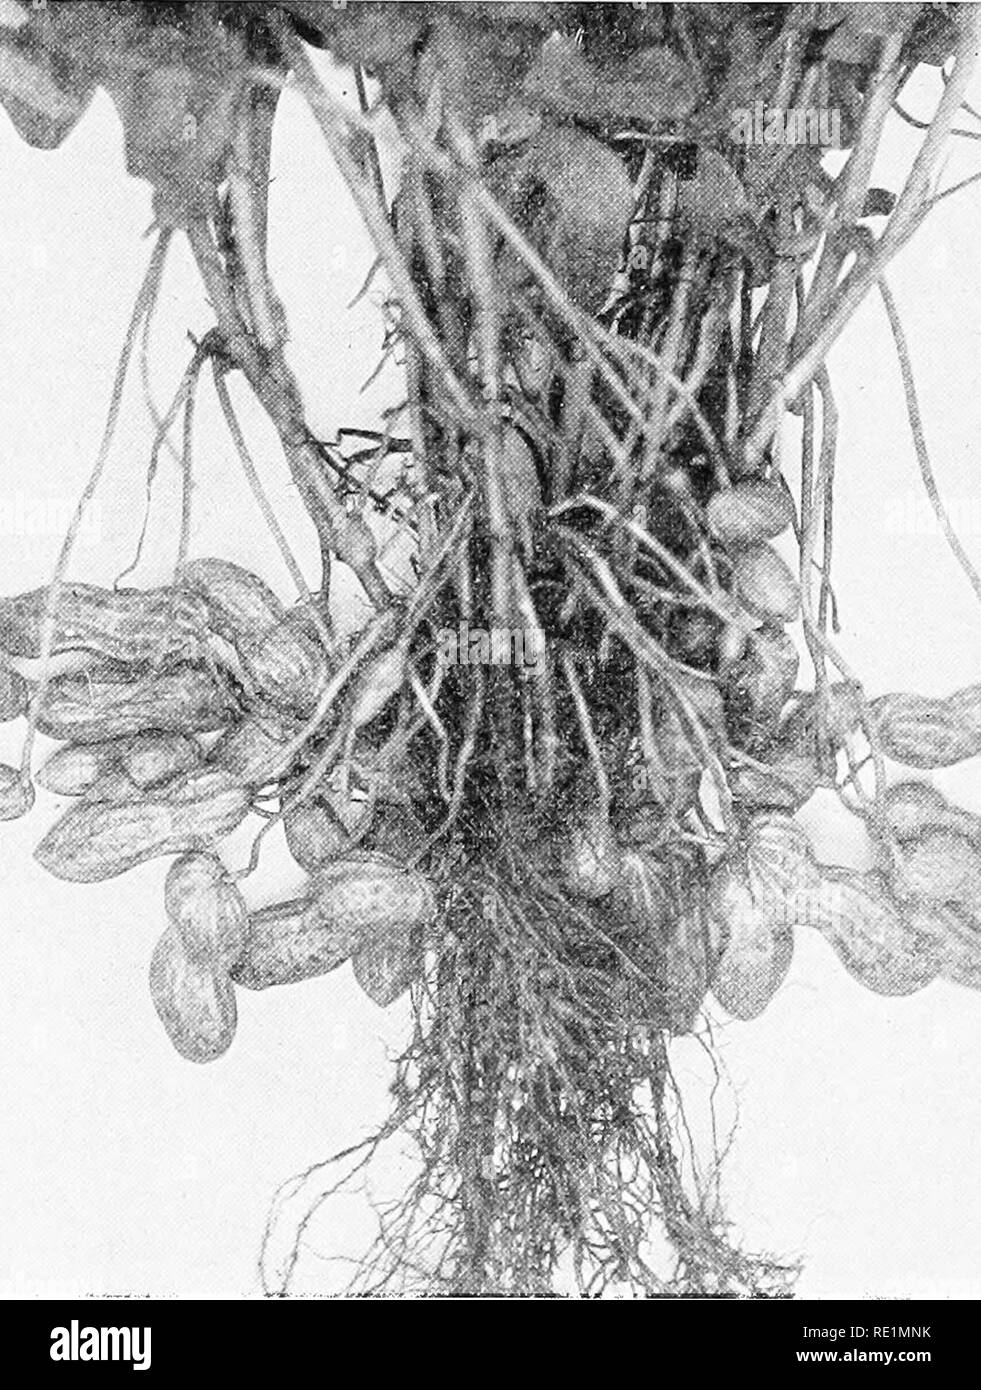 . College botany; structure, physiology and economics of plants. Botany. 358 COLLEGE BOTANY LiNACEiE (Flax Family).—Herbs, occasionally shrabs; leaves alternate, simple; flowers in racemes or corymbs, sym- metrical ; sepals five (sometimes four or six); petals same iu. Fig, 200.—Peanut plant with the elongated stems sending seeds into the soil shown at right and left. number as sepals; stamens equal to petals and alternate with them, united at the base; carpels three tO' five, united at base to form a compound, dr&gt;', capsular fruit. The most important member of the family is tlie flax plant Stock Photo